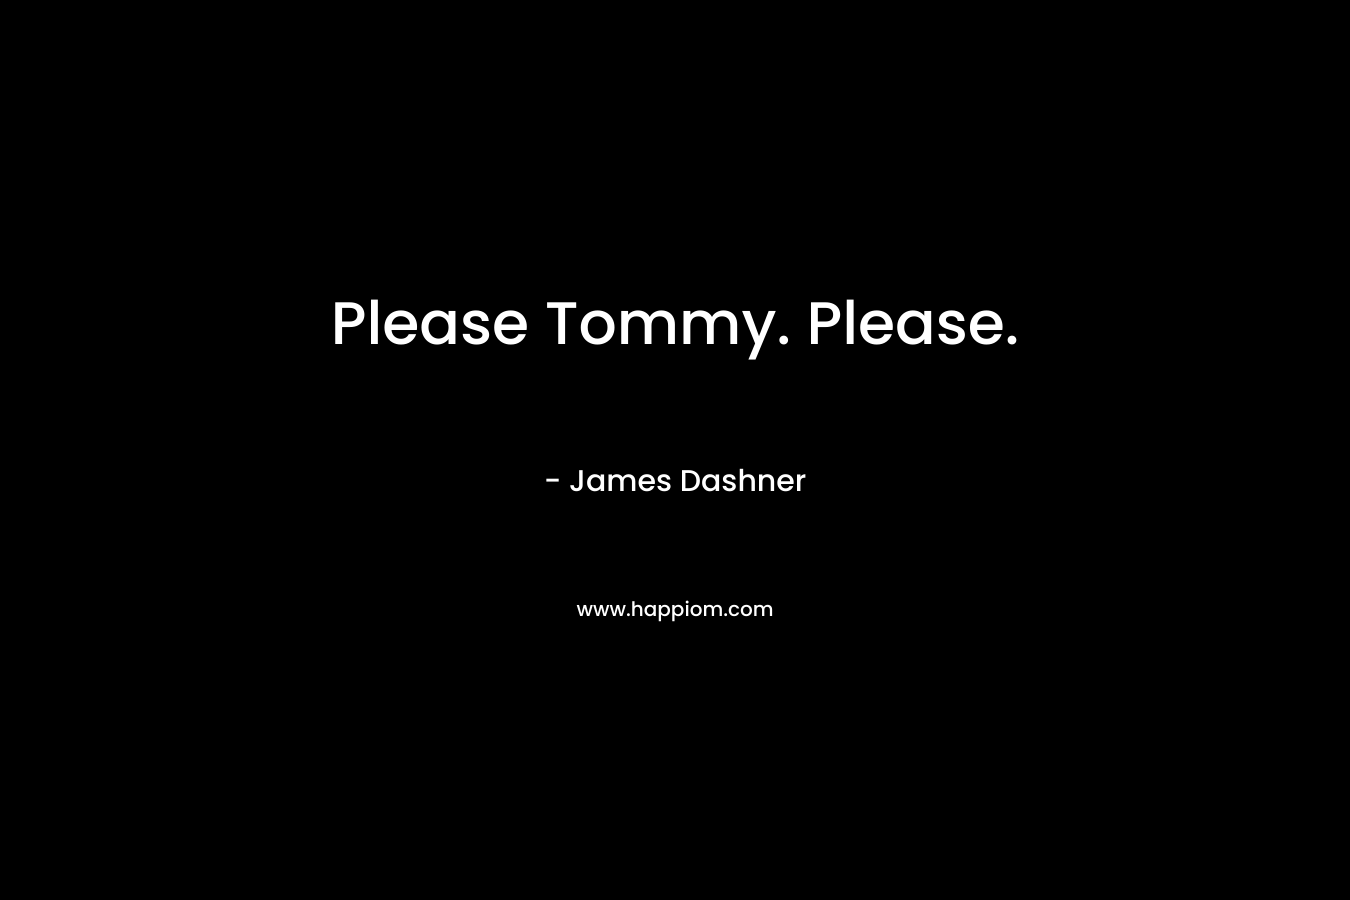 Please Tommy. Please.